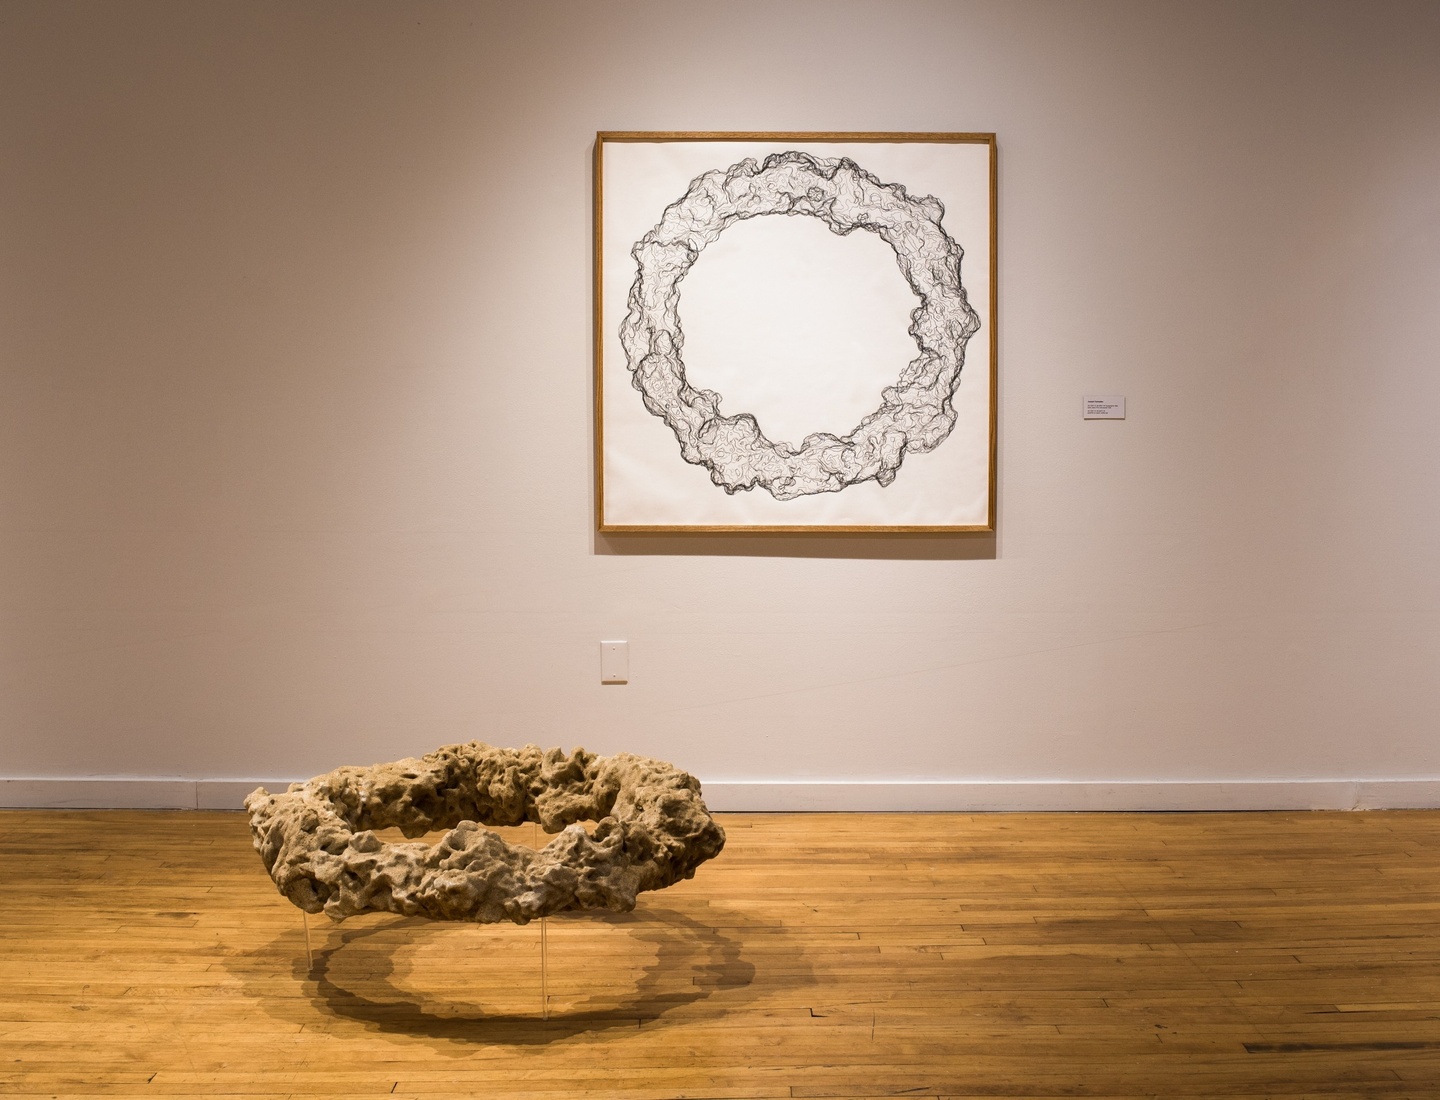 Floating circular rock on the gallery floor. An illustration of the same rock hangs behind it